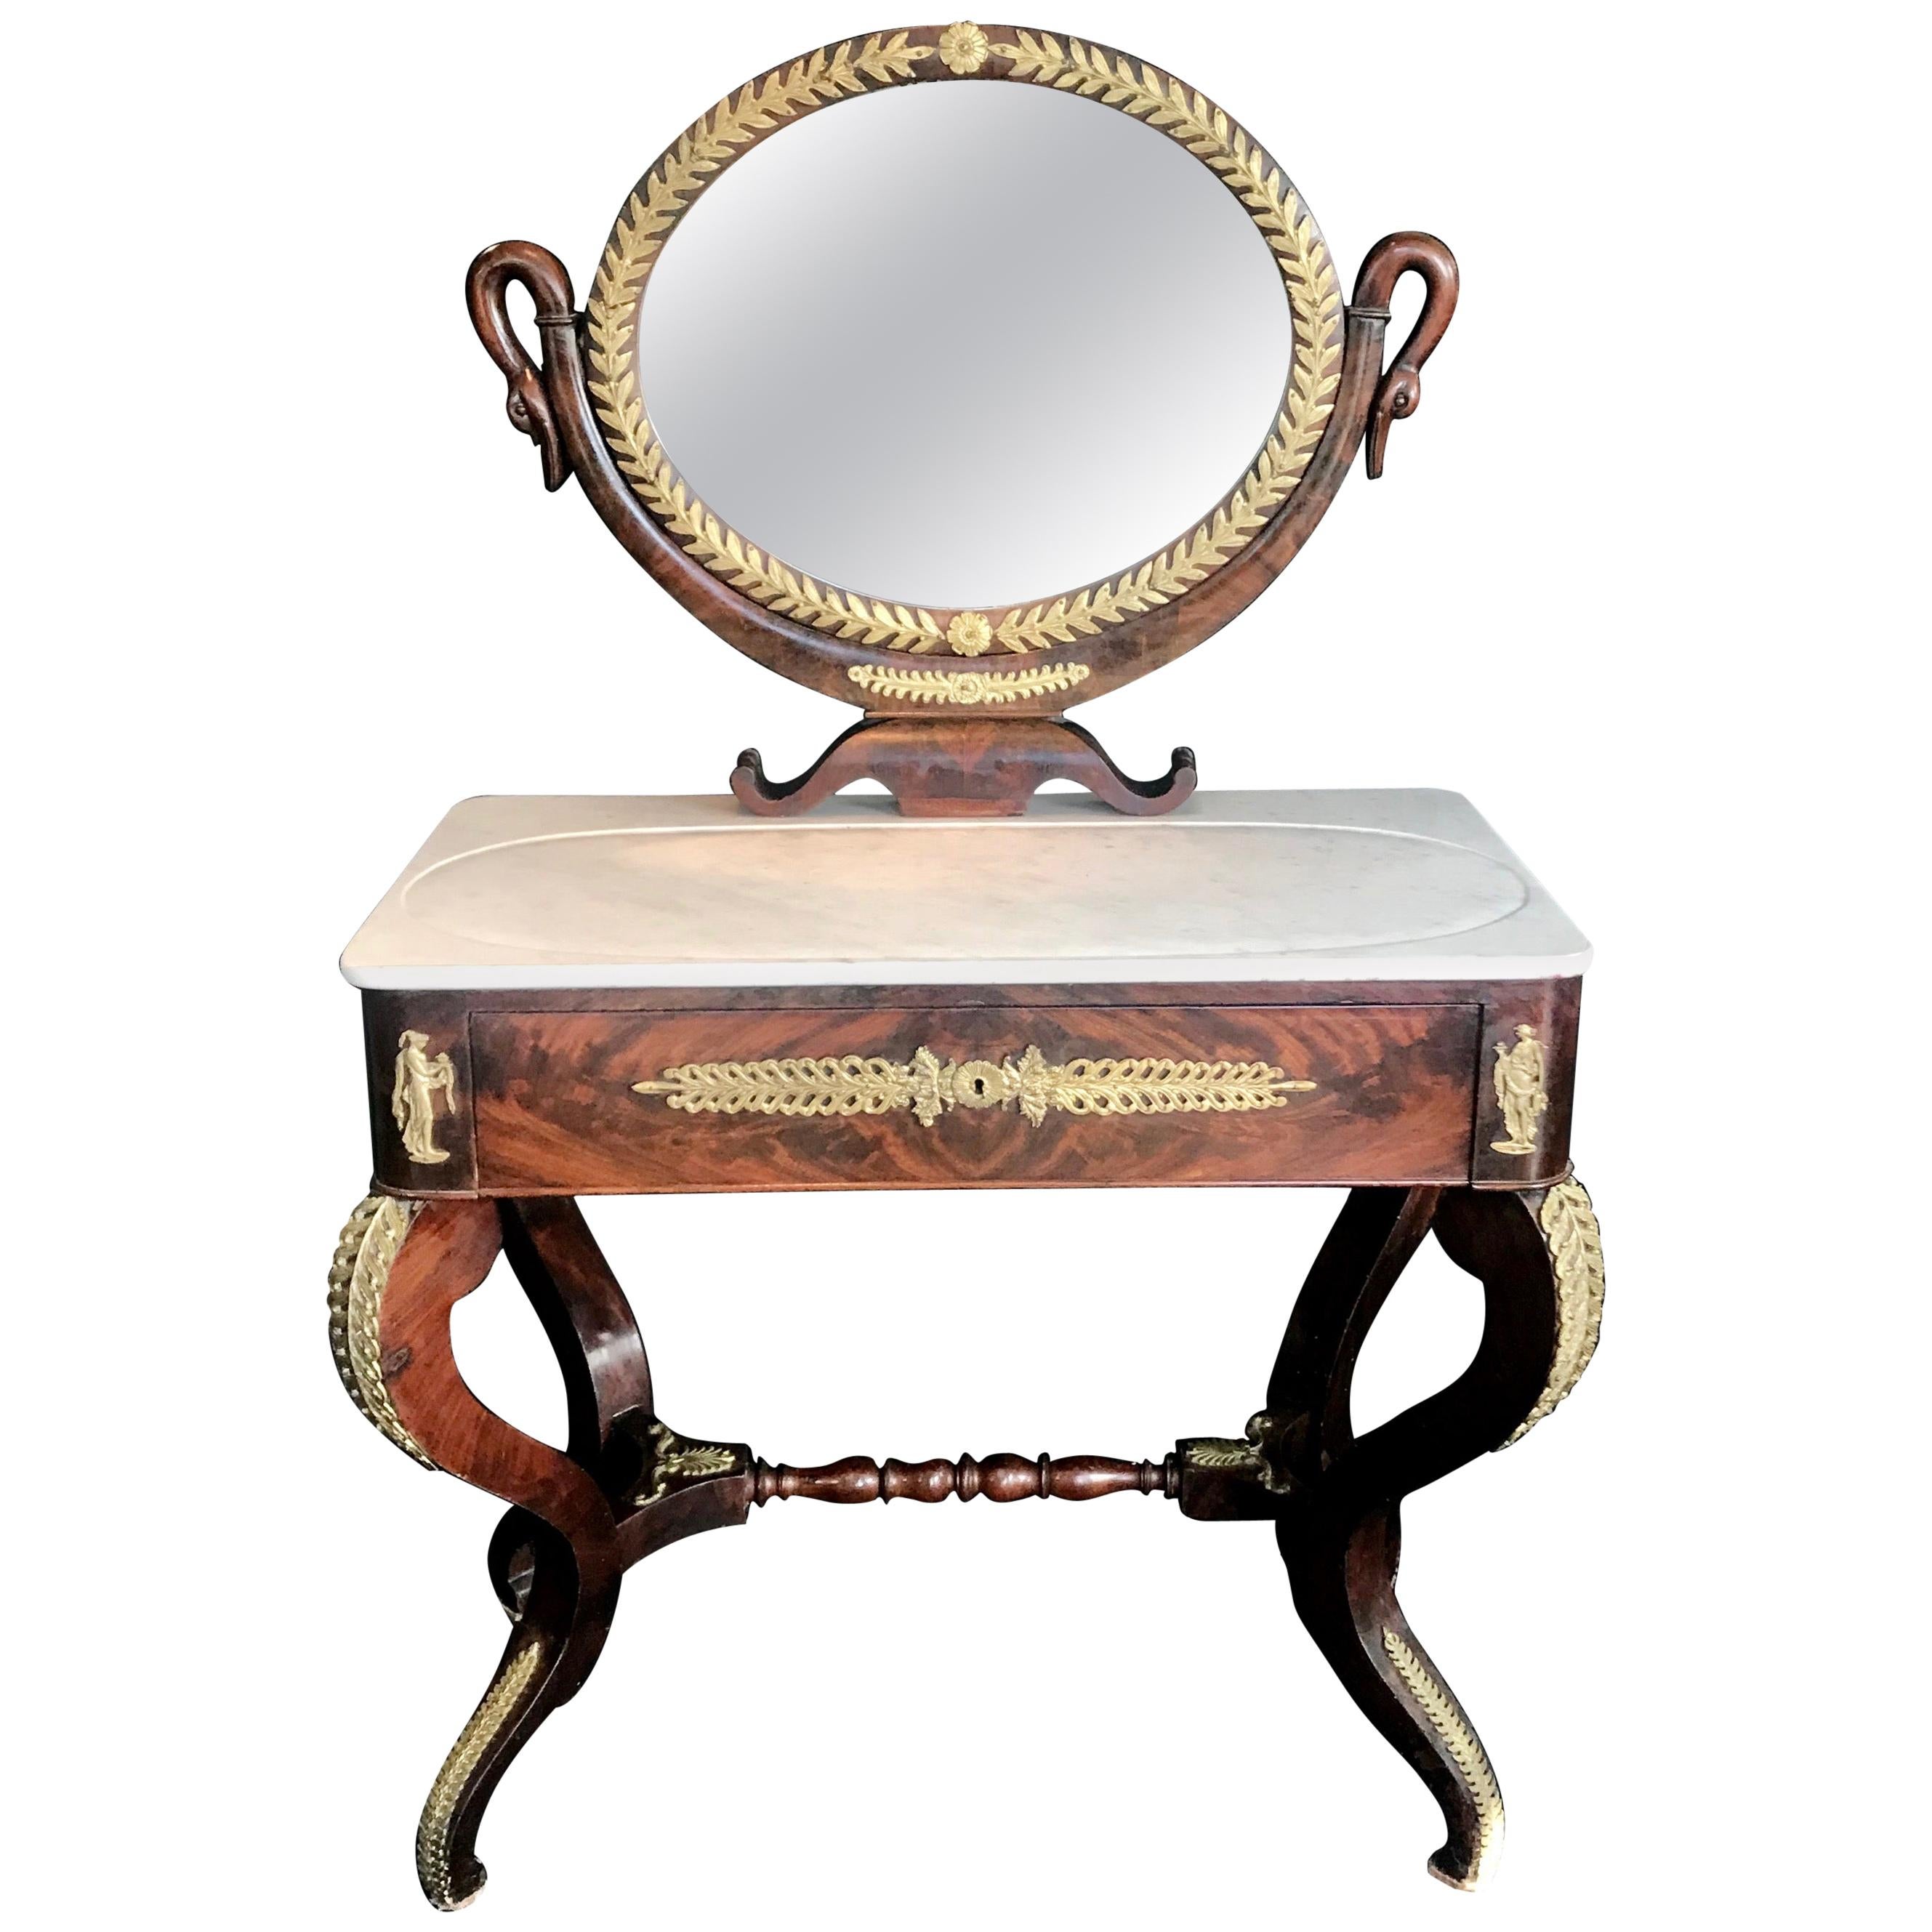 Superb 19th Century French Empire Neoclassical Mahogany Dressing Table Vanity For Sale